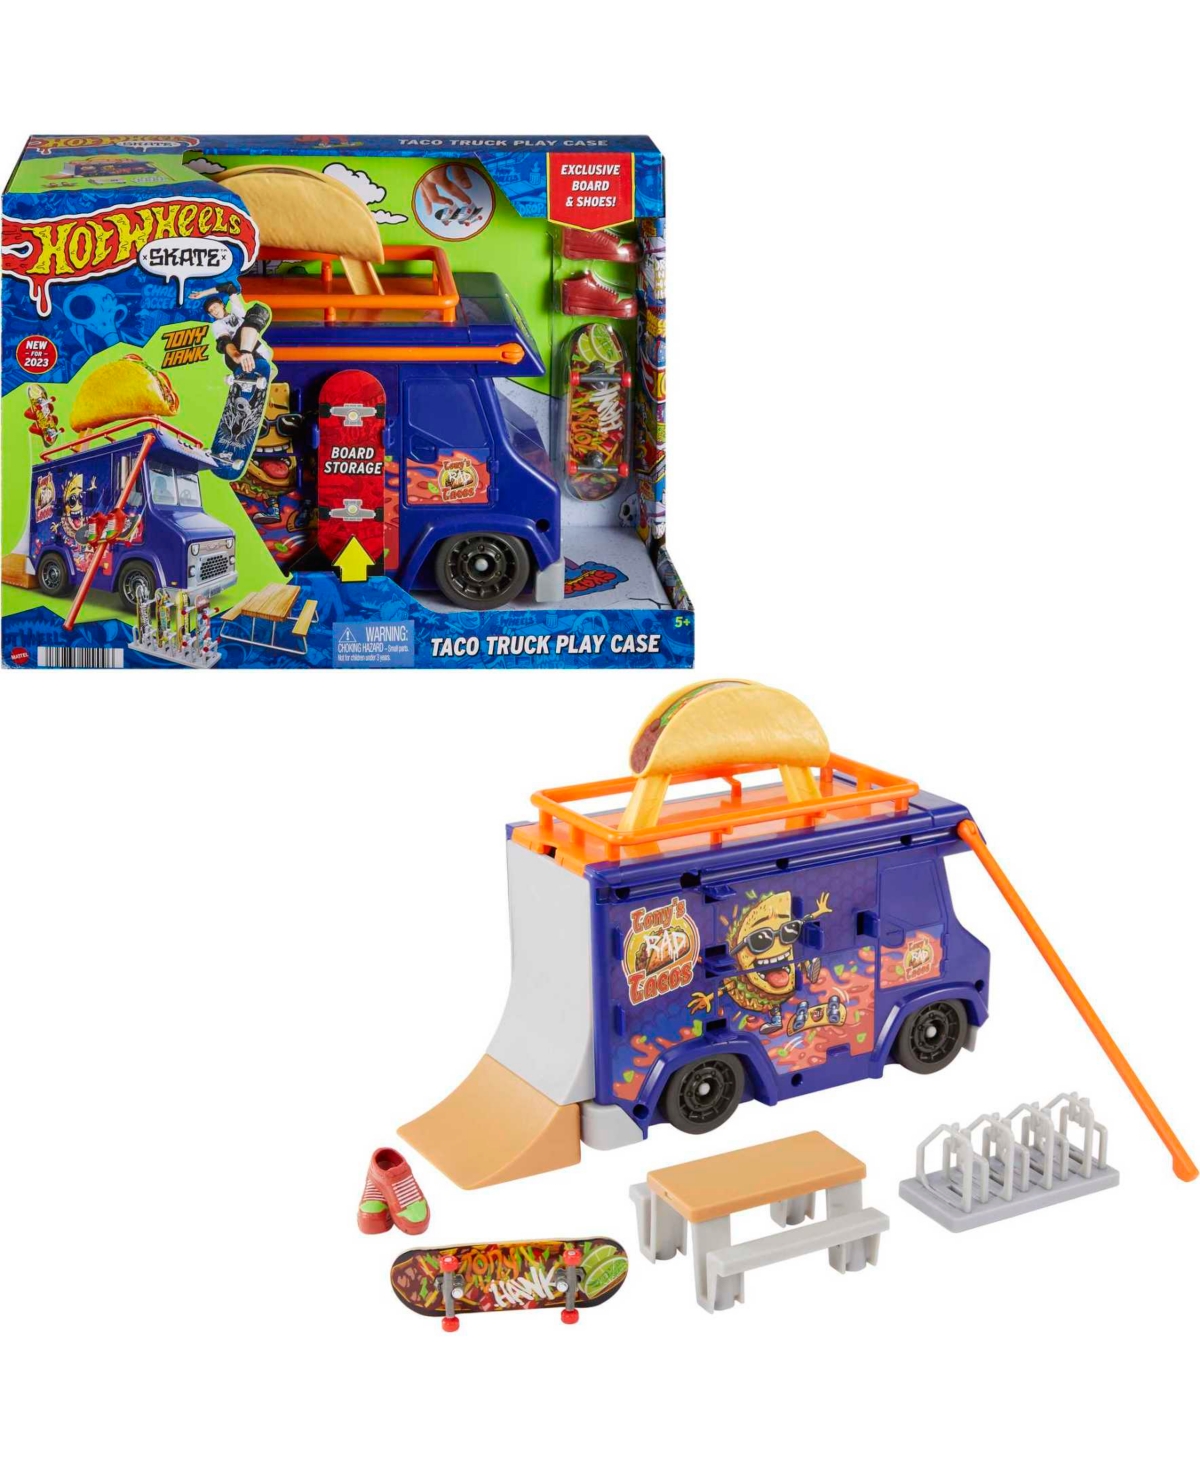 Hot Wheels Skate Taco Truck Play Case With 1 Fingerboard And 1 Pair Of Shoes In Multi-color